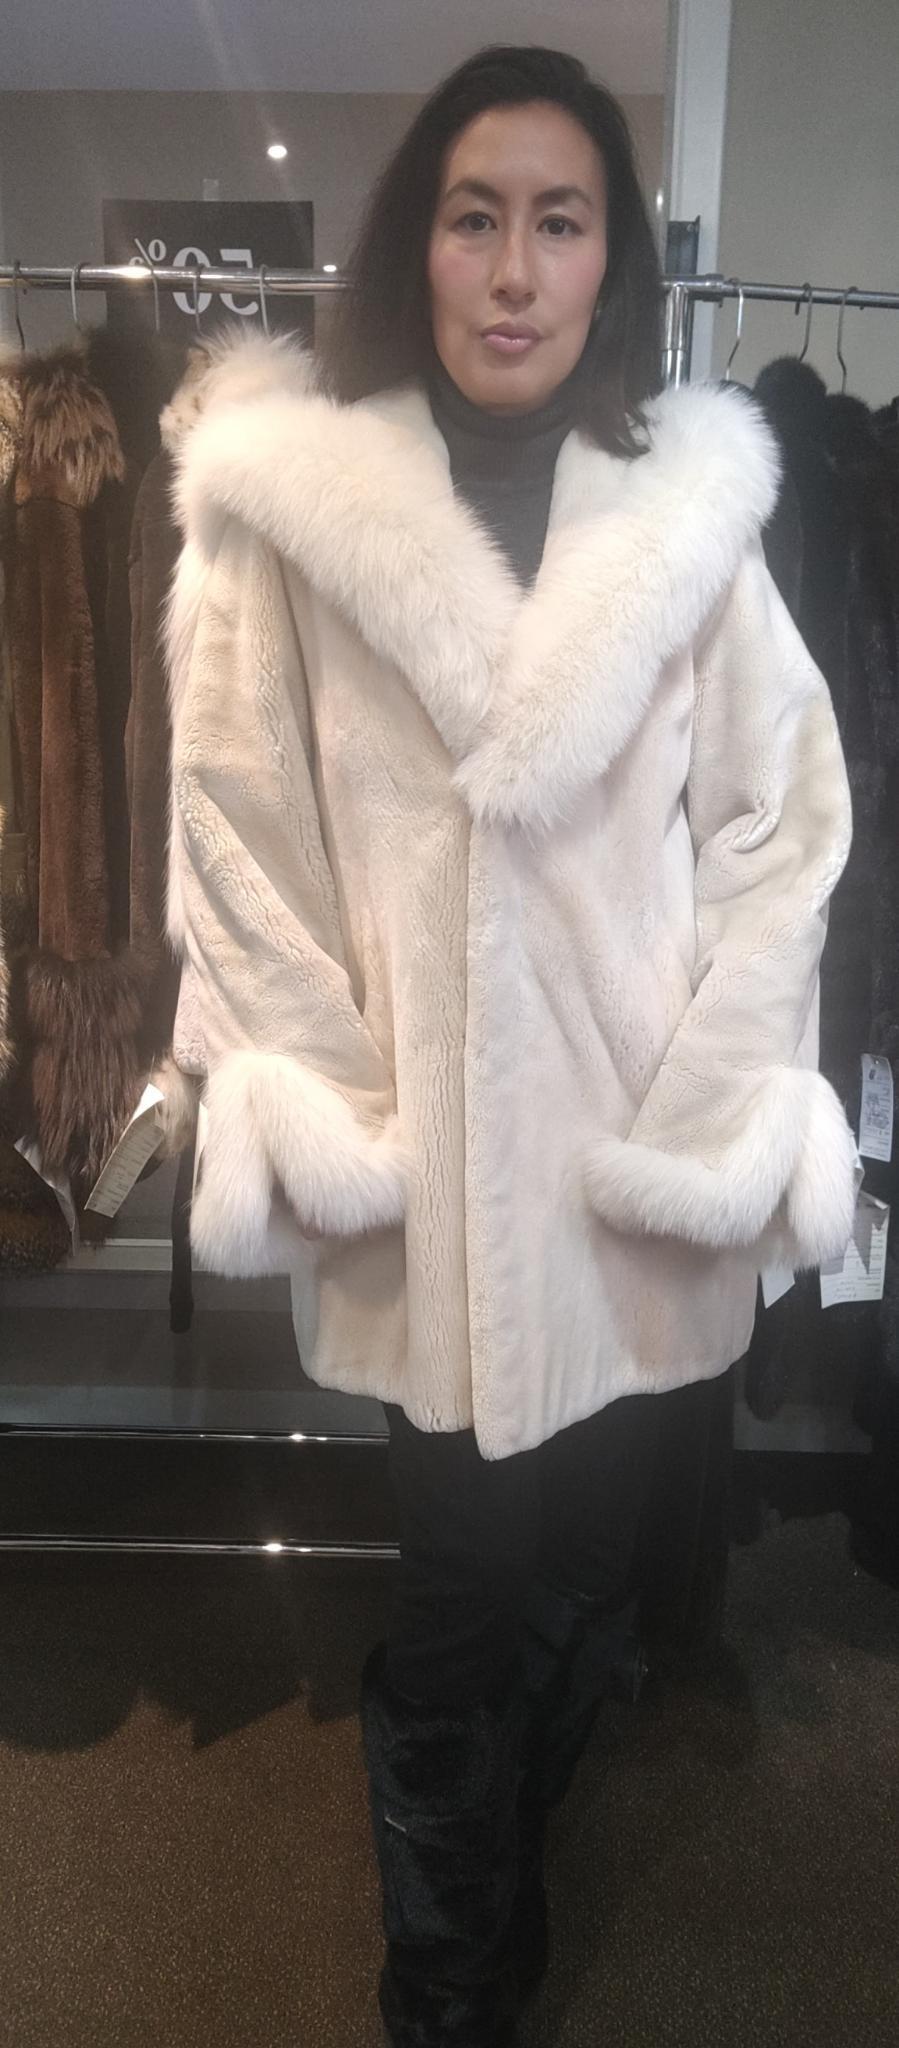 PRODUCT DESCRIPTION:

Sheared Beaver Fur Coat with Fur Trim (Size 12-M)

Condition: good 

Closure: Hooks & Eyes

Color: Cream, beige

Material: Sheared Beaver

Garment type: short jacket

Sleeves: Dolman with bracelet cuff

Pockets: Two side